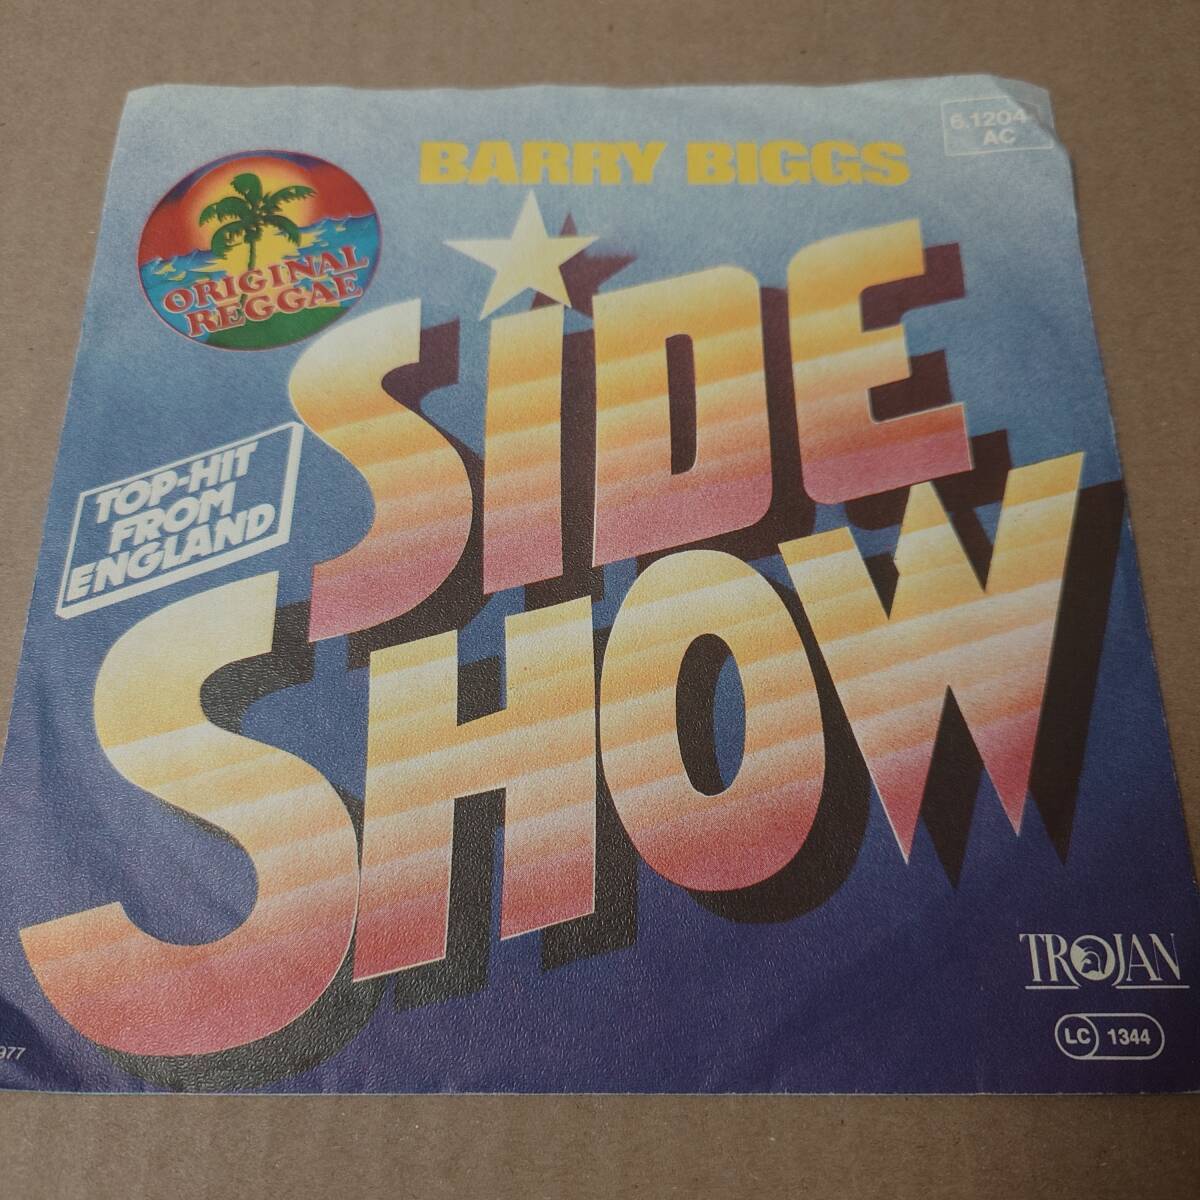 Barry Biggs - Side Show / Why Must You Cry // Trojan 7inch / Lovers_画像1